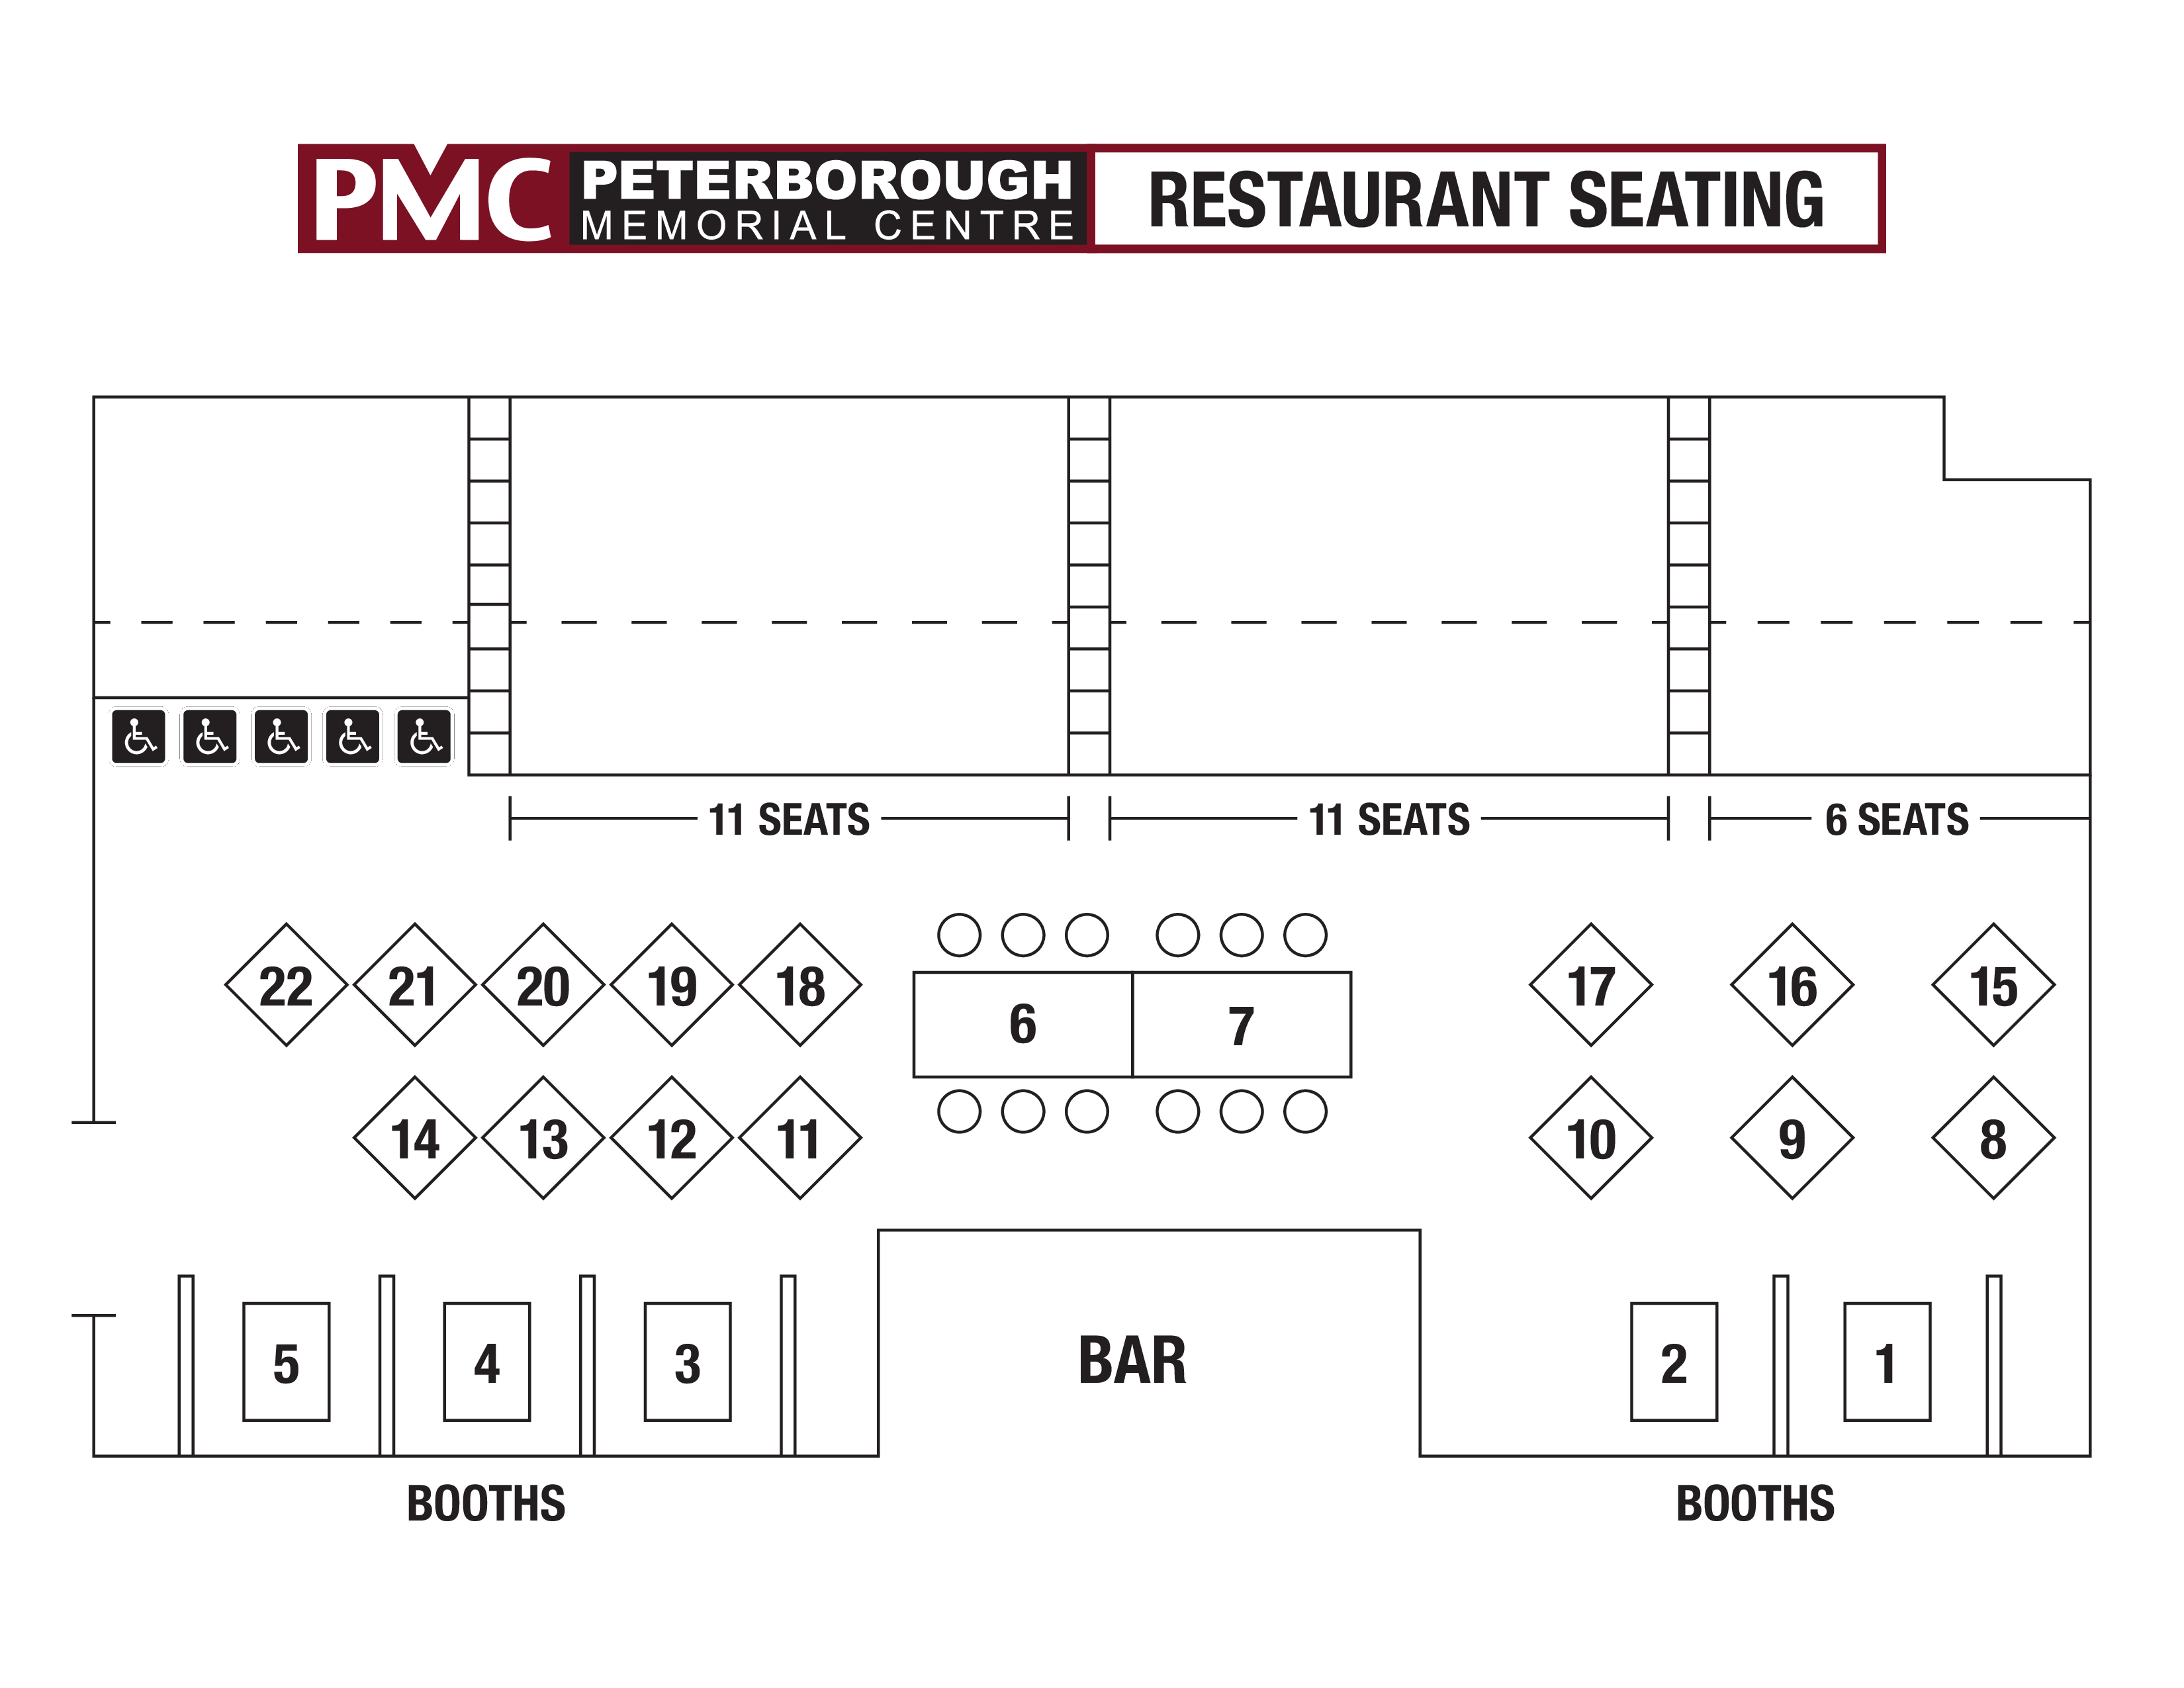 Restaurant Seating Chart Template from www.allbusinesstemplates.com